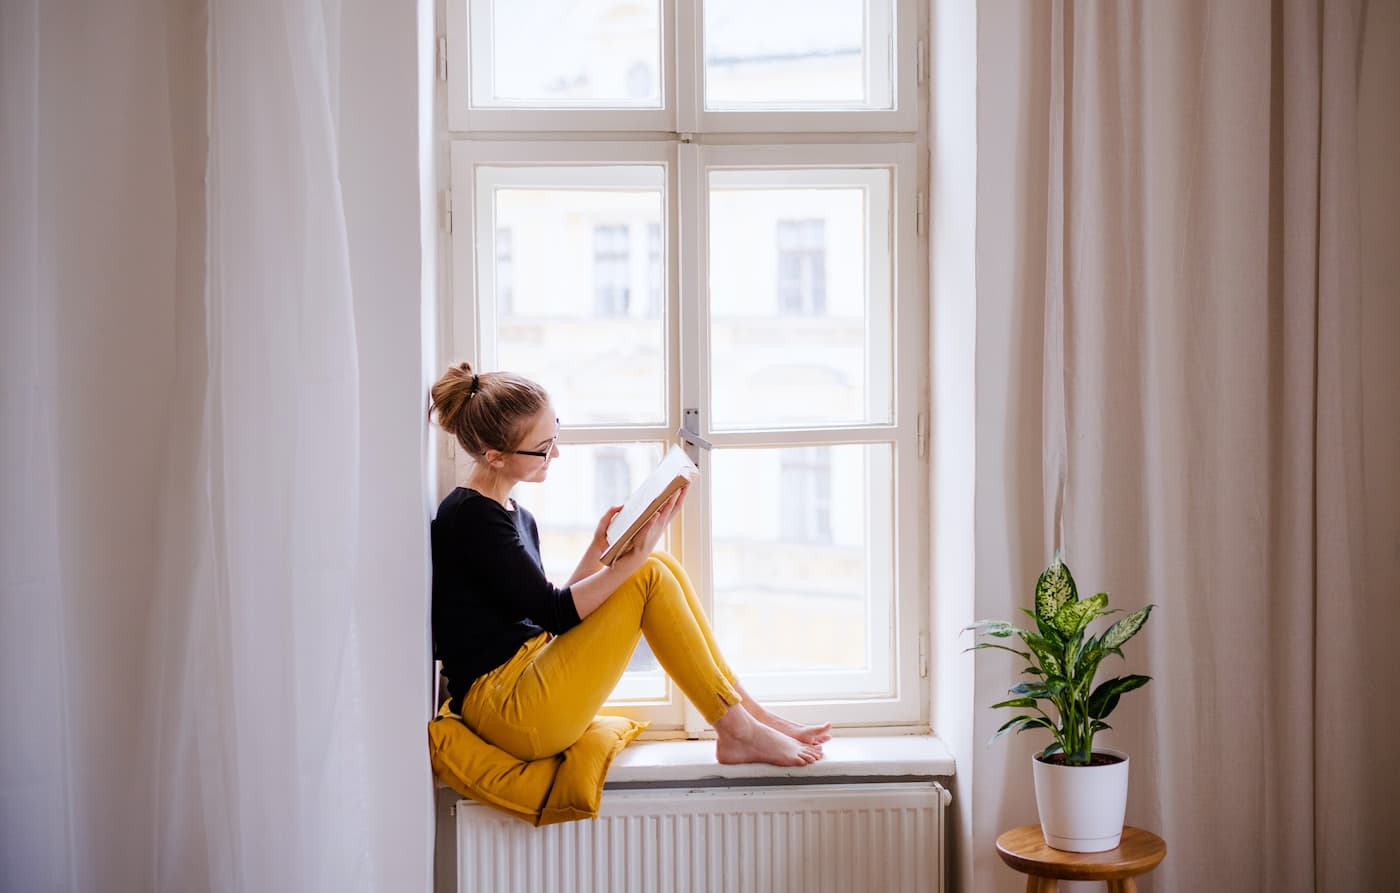 Woman reading on a window will